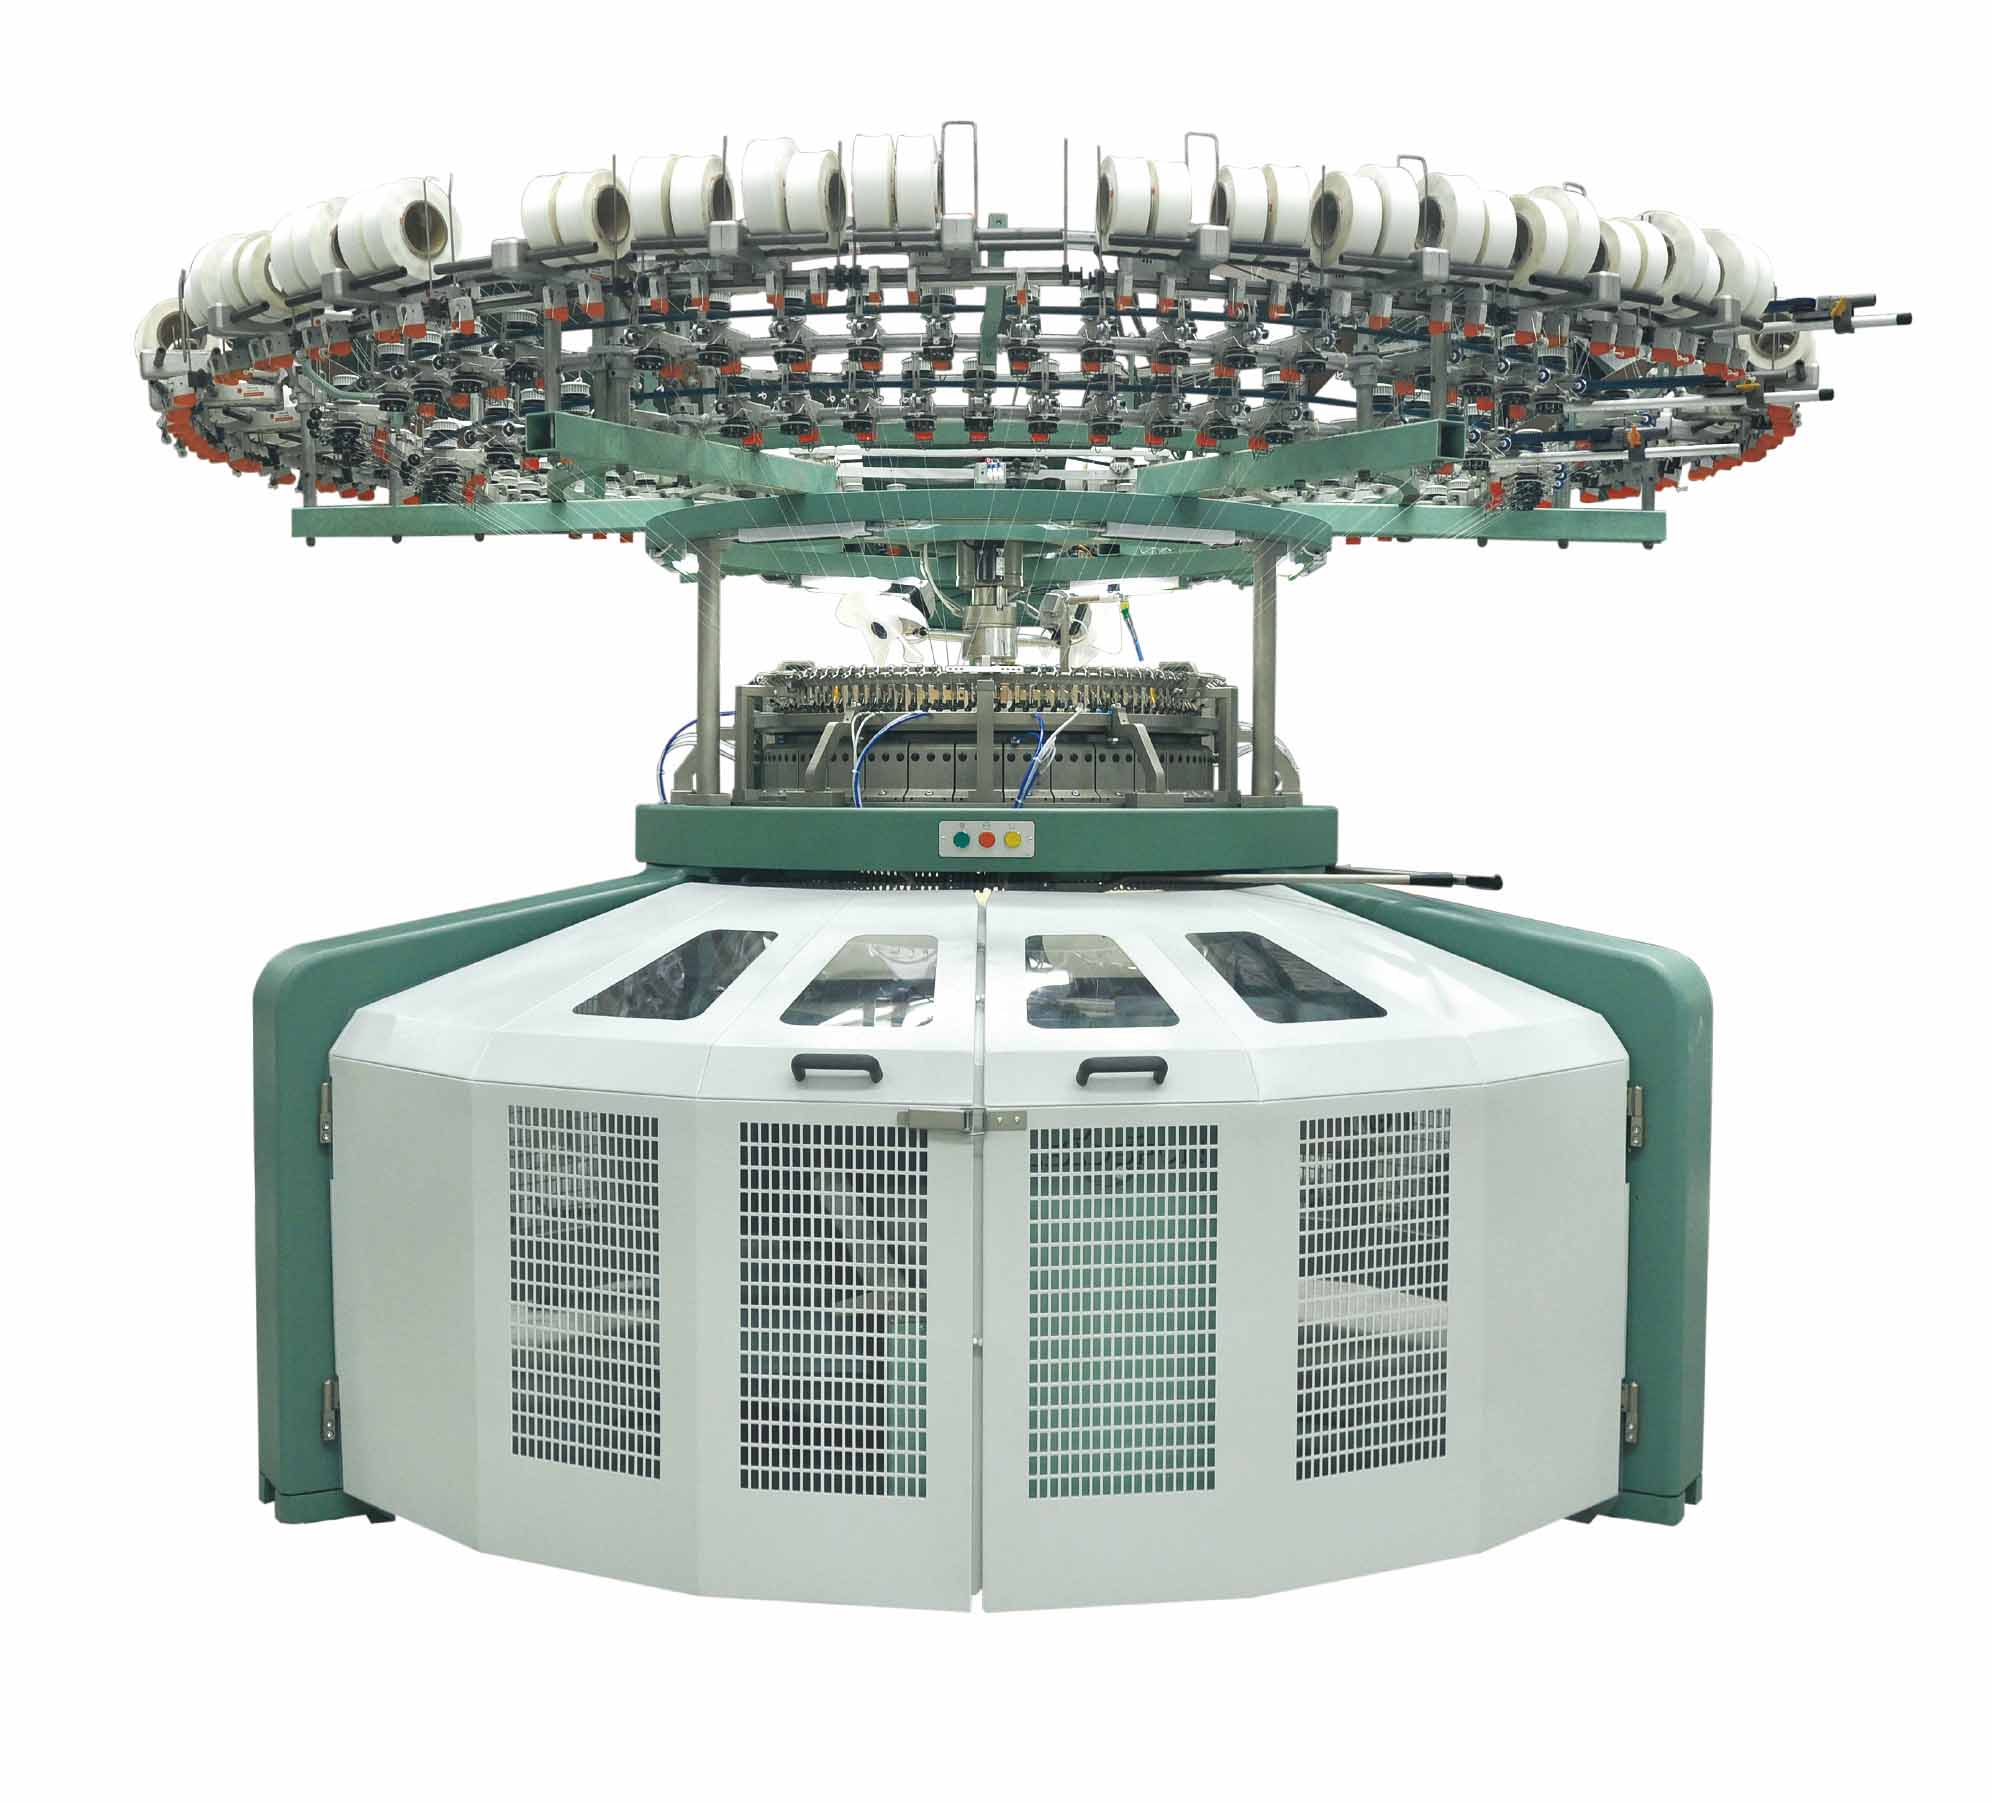 Revolutionary Knitting Machine Offers Unmatched Precision and Efficiency